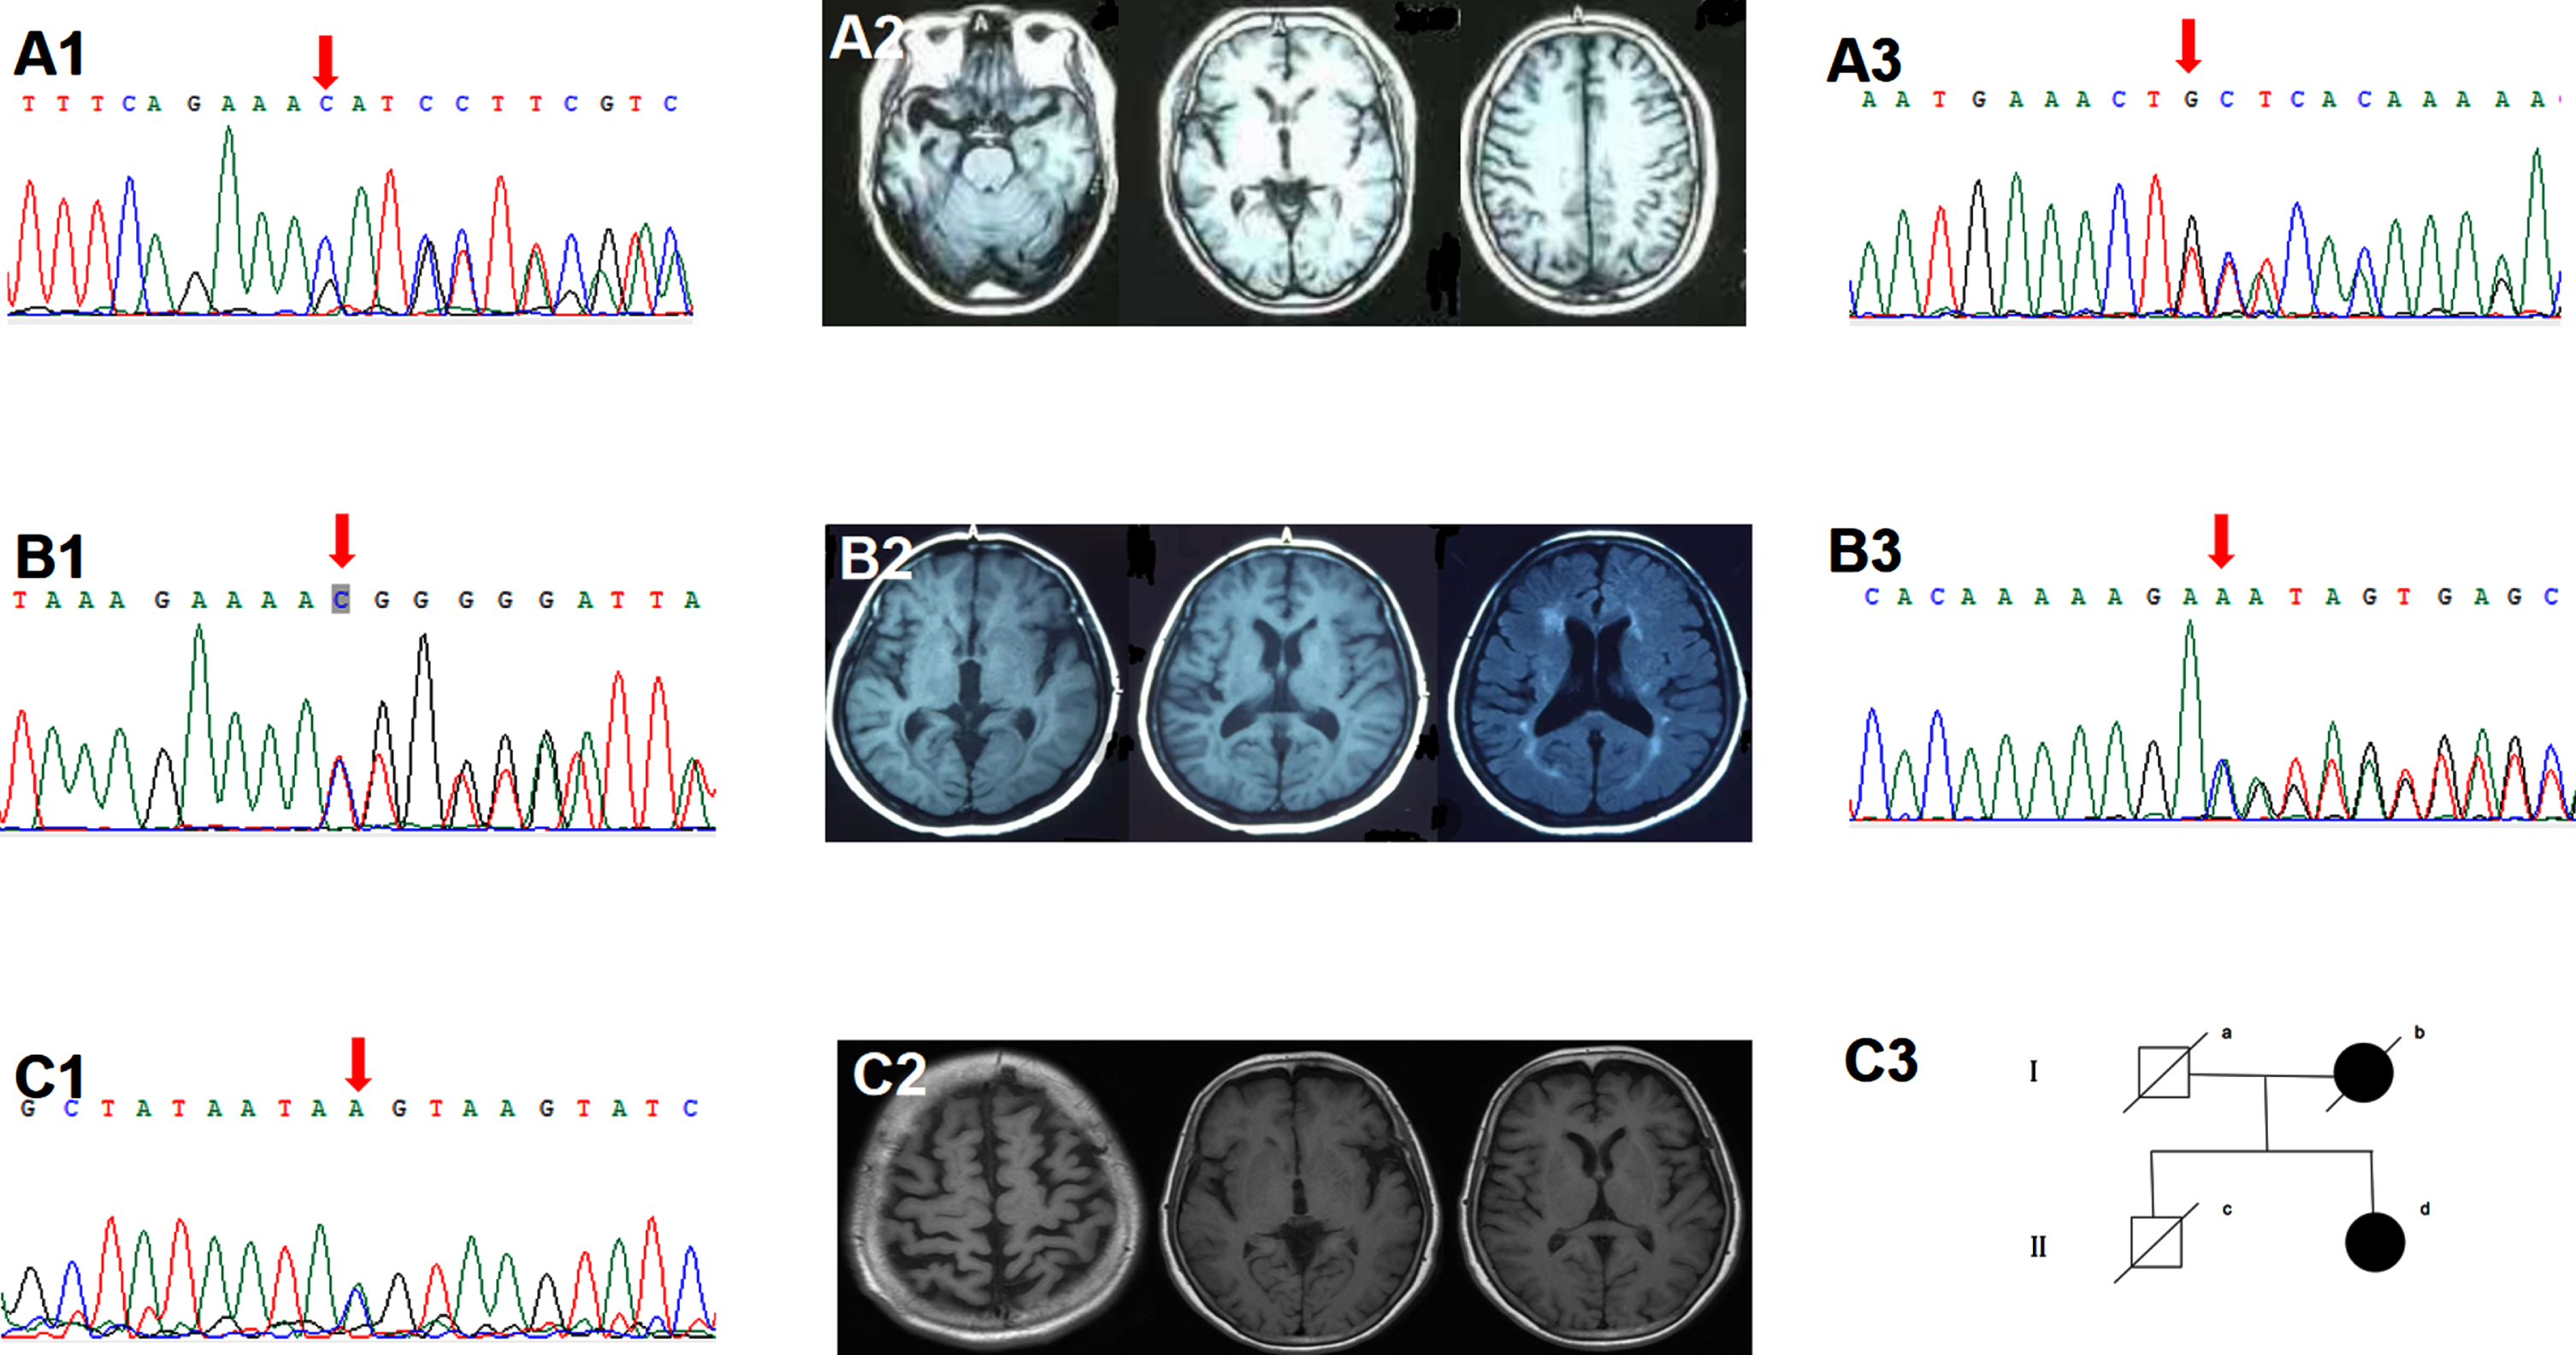 Clinical data of the TBK1 variant carriers. A1-2) Sanger sequencing indicated the TBK1 p.K622fs (c.1866_1872del) mutation. Brain MRI showed right temporal predominant atrophy. B1-2) Sanger sequencing indicated the TBK1 p.T31fs (c.92delC). Brain MRI showed left temporal predominant atrophy with periventricular white matter hyperintensities, fazekas grade 2. A3, B3) Sanger sequencing indicated the TBK1 p.T457fs (c.1371_1372del), p.T462fs (c.1385_1388del). C1-3) Sanger sequencing indicated the TBK1 p.T331N (c.992C>A) mutation. Brain MRI showed bilateral frontal and parietal atrophy with mild left insular atrophy. II-d was the index patient. Her mother developed cognitive decline in her 80s and died ten years later. Her father died at 70 without cognitive impairment. Her cognitively healthy brother had a sudden death at 60.